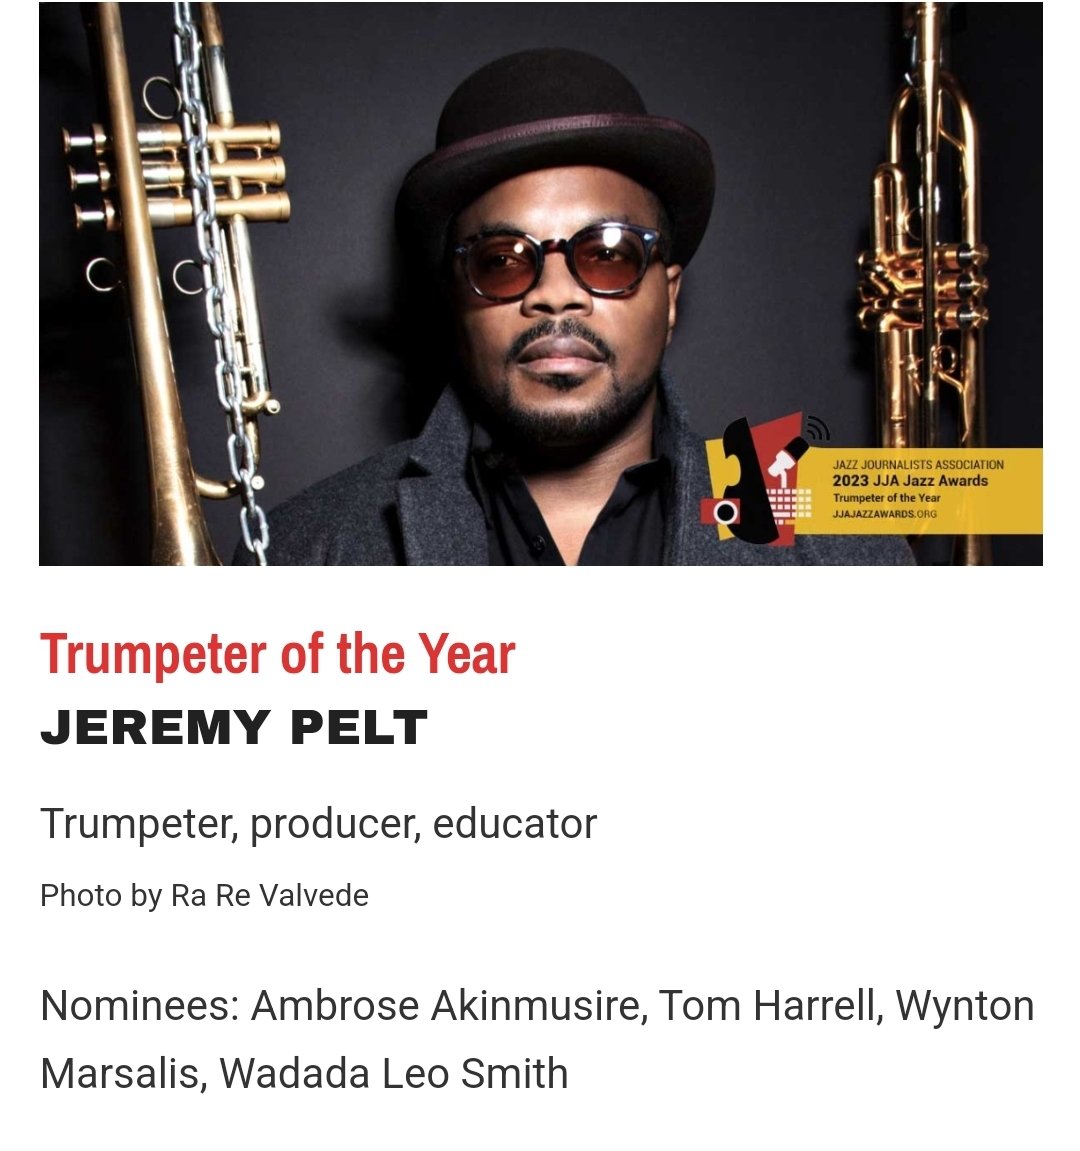 Wow! What can I say but, THANKS to the Jazz Journalists for bestowing this honor on me! It feels good to be recognized for my contribution to this art form. Also, Congratulations to the other winners and nominees! I'll not soon forget this! #trumpeteroftheyear